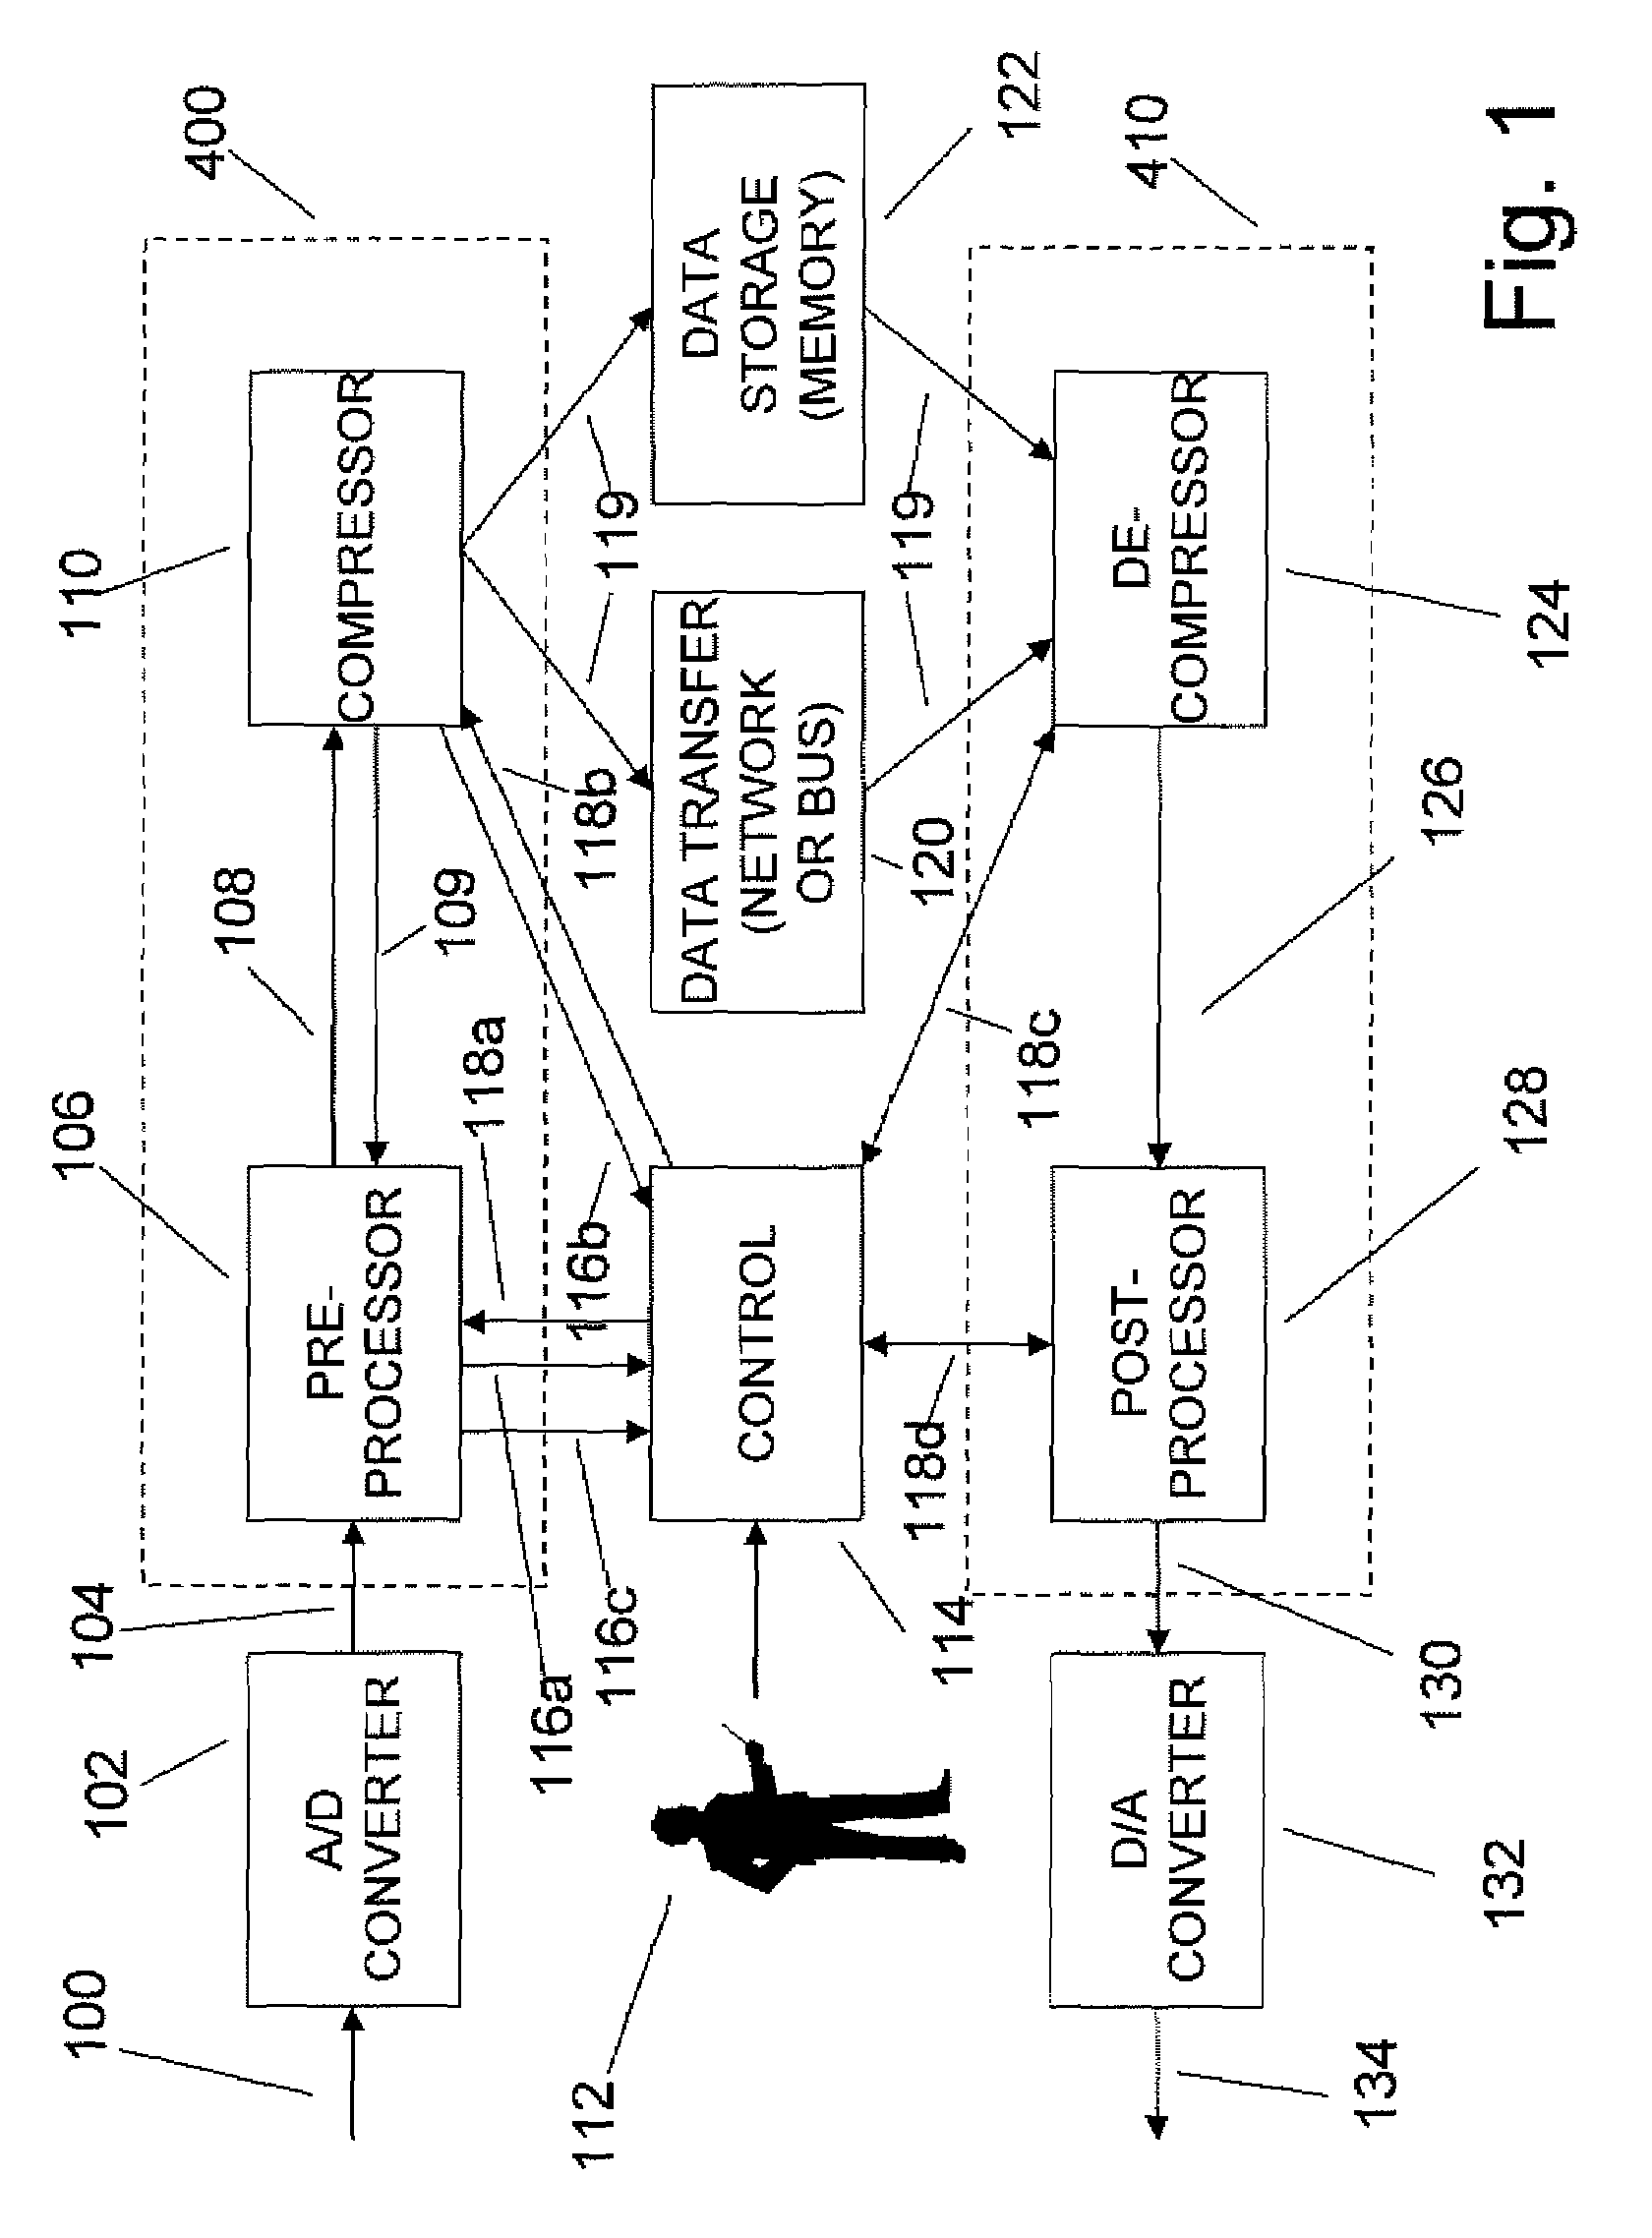 Enhanced data converters using compression and decompression